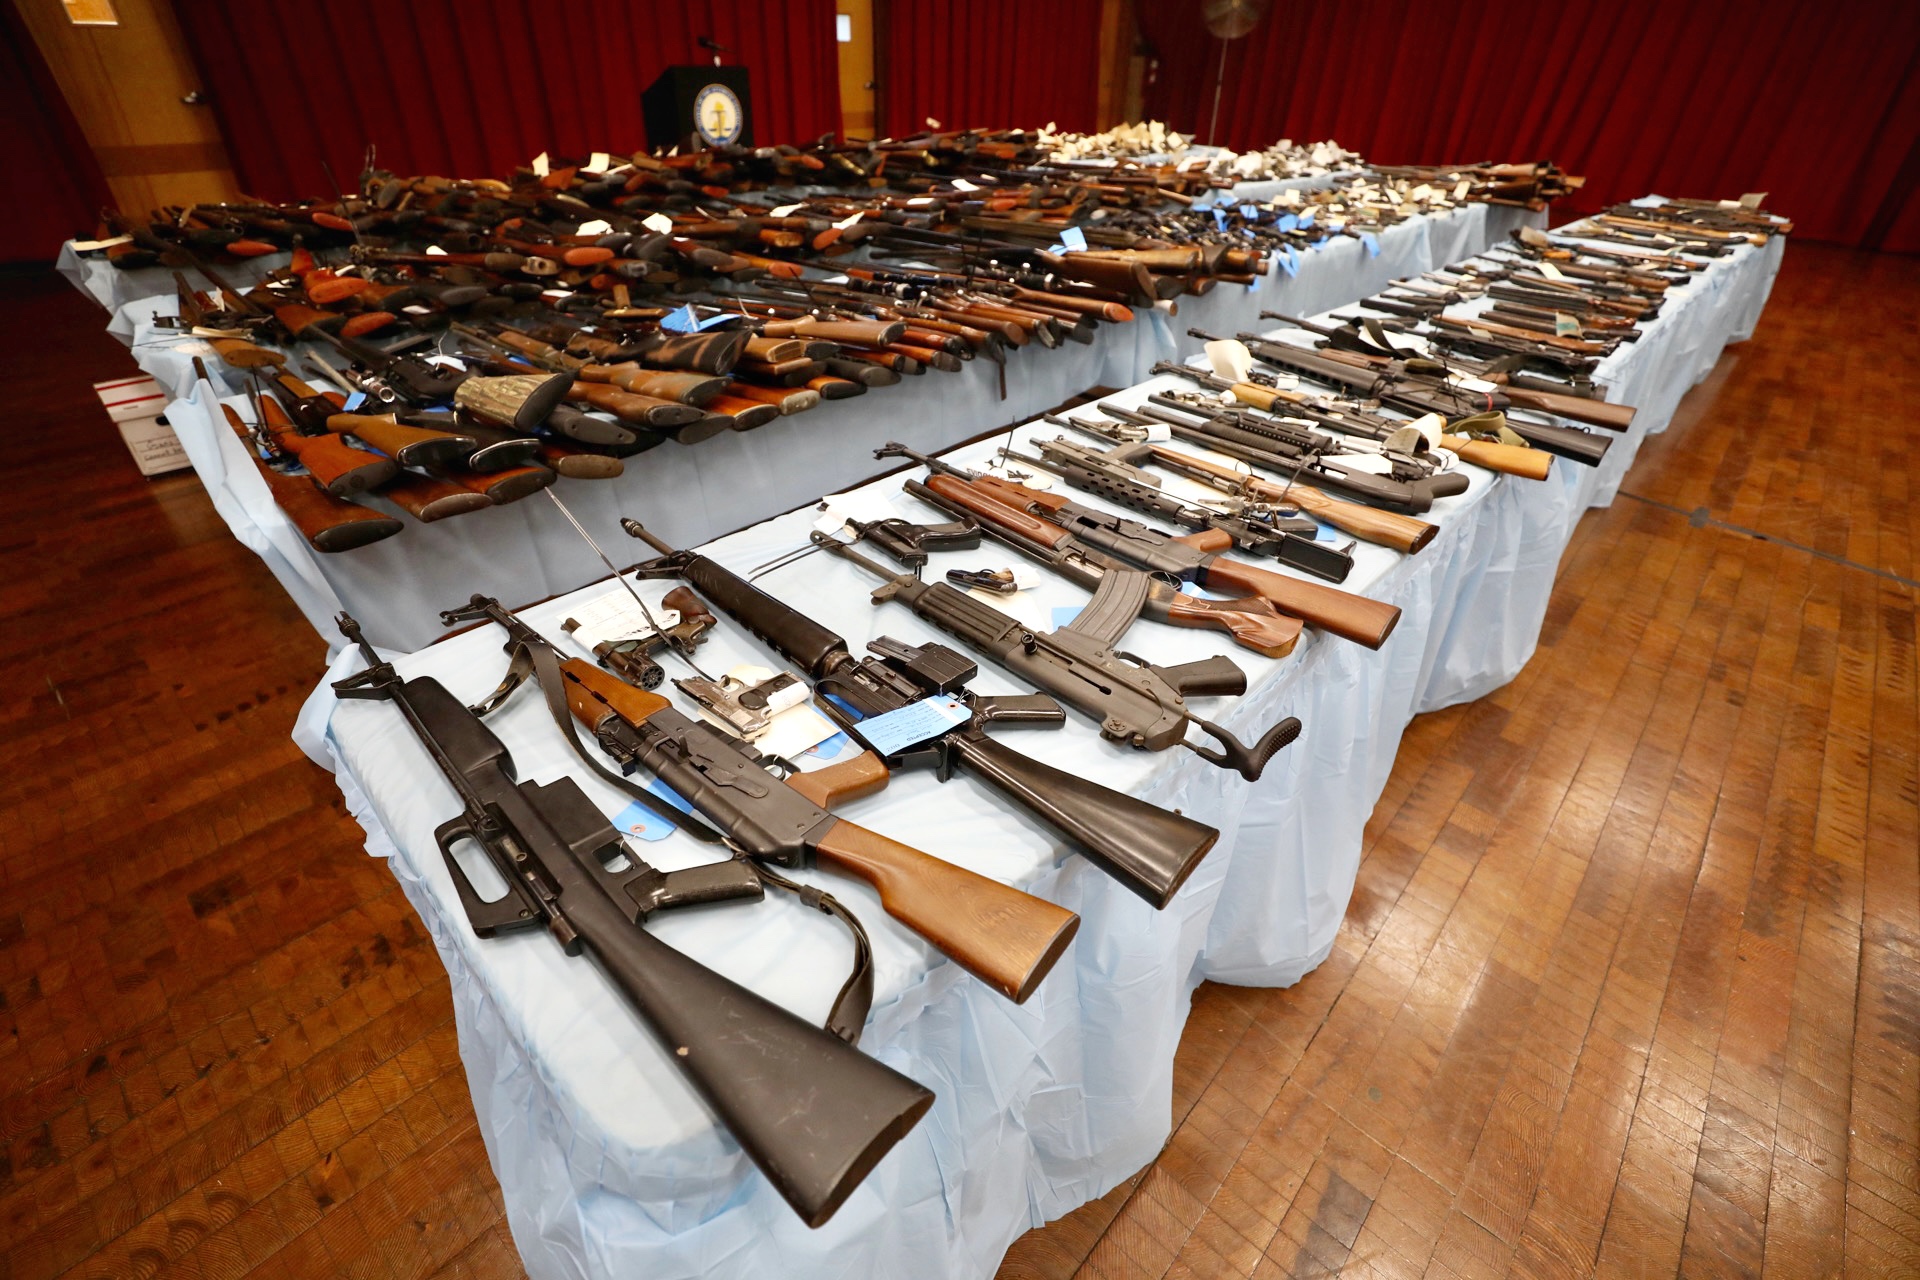 Nearly 1,000 guns taken off the streets following buyback events